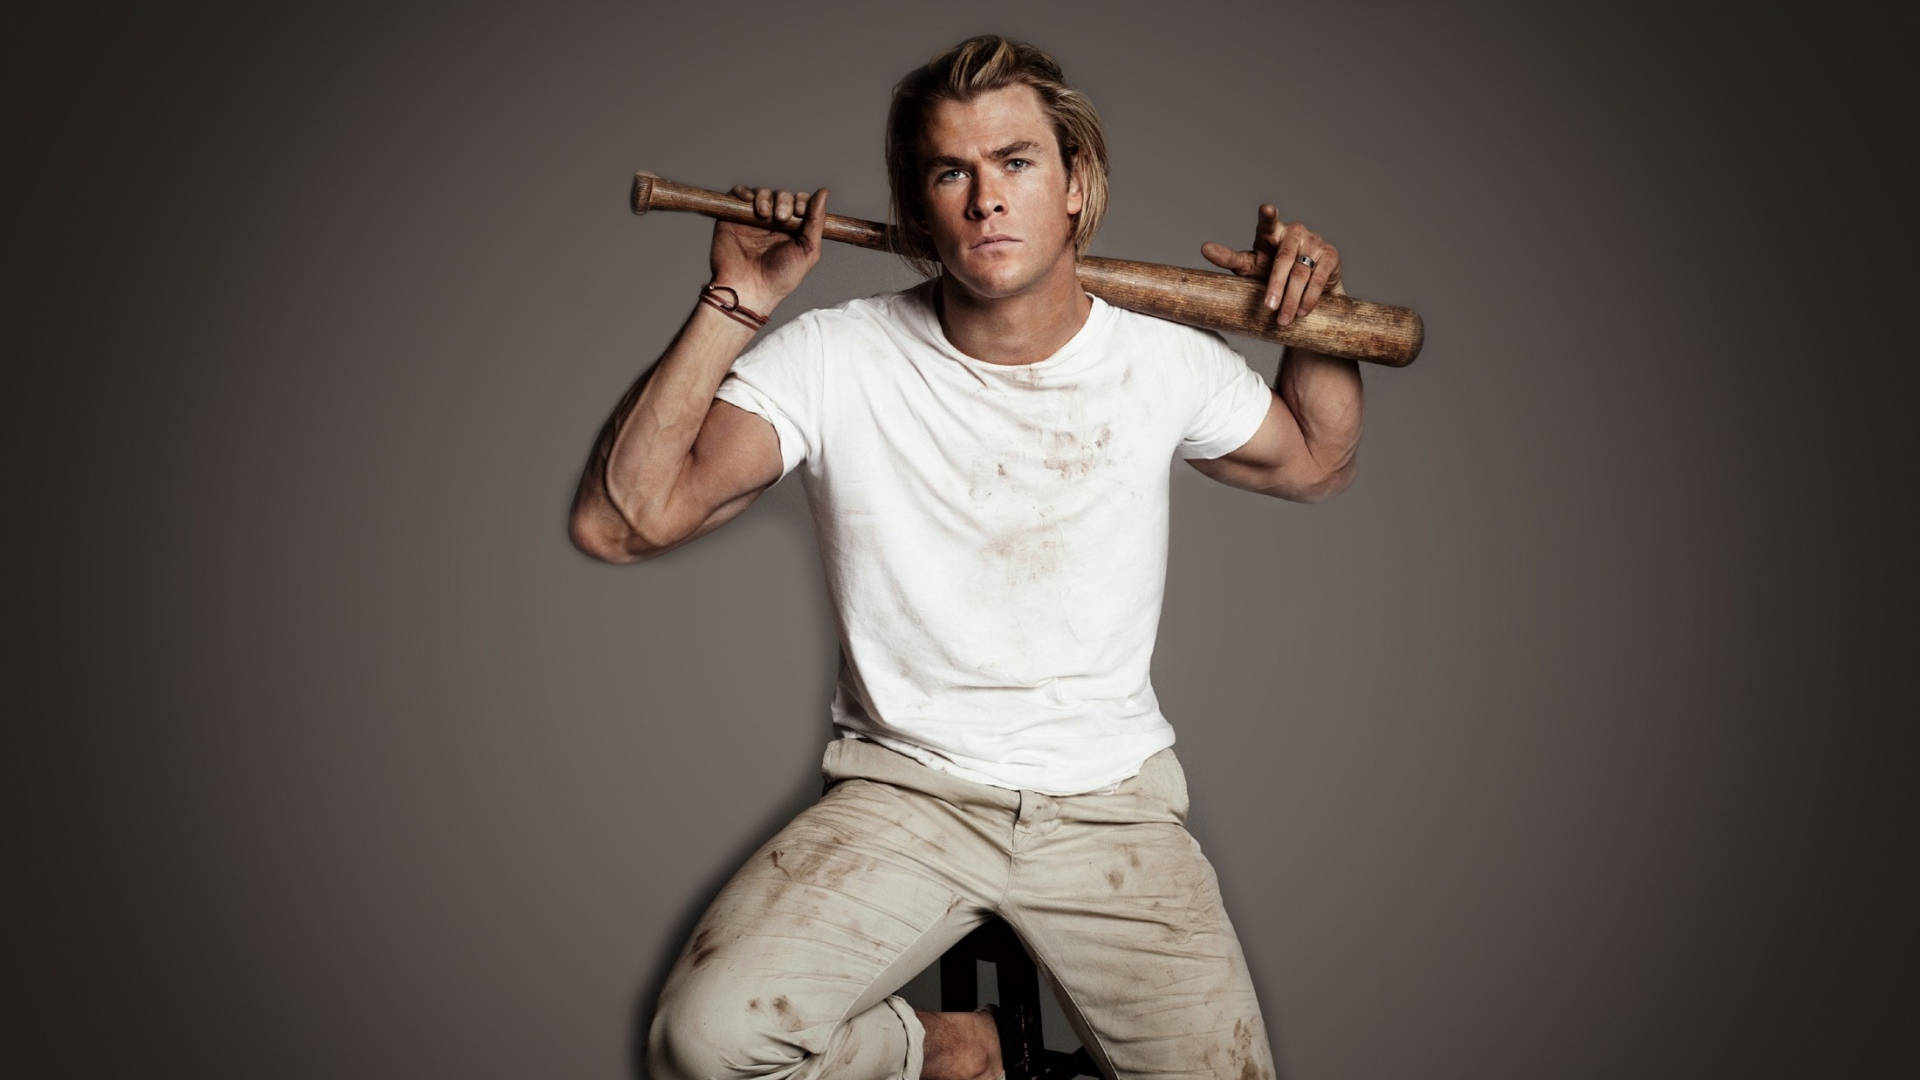 Chris Hemsworth, Star Of Thor And The Avengers Series, Holds A Bat. Background